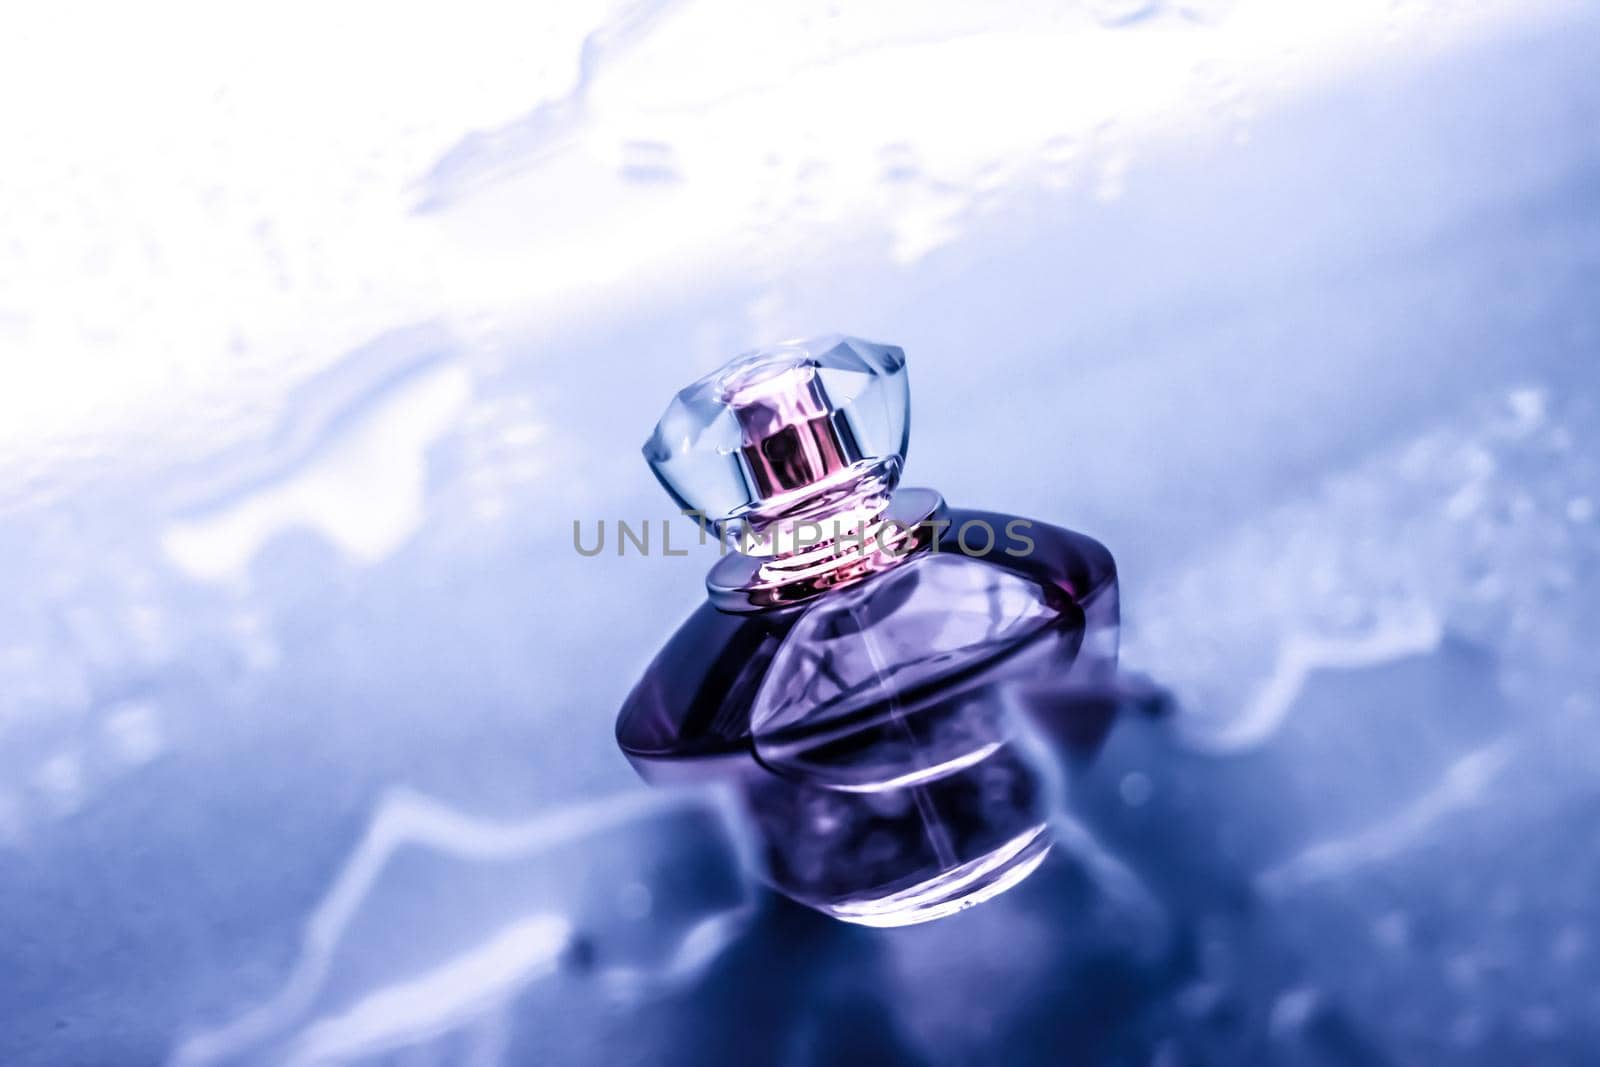 Perfumery, cosmetics and branding concept - Perfume bottle under purple water, fresh sea coastal scent as glamour fragrance and eau de parfum product as holiday gift, luxury beauty spa brand present